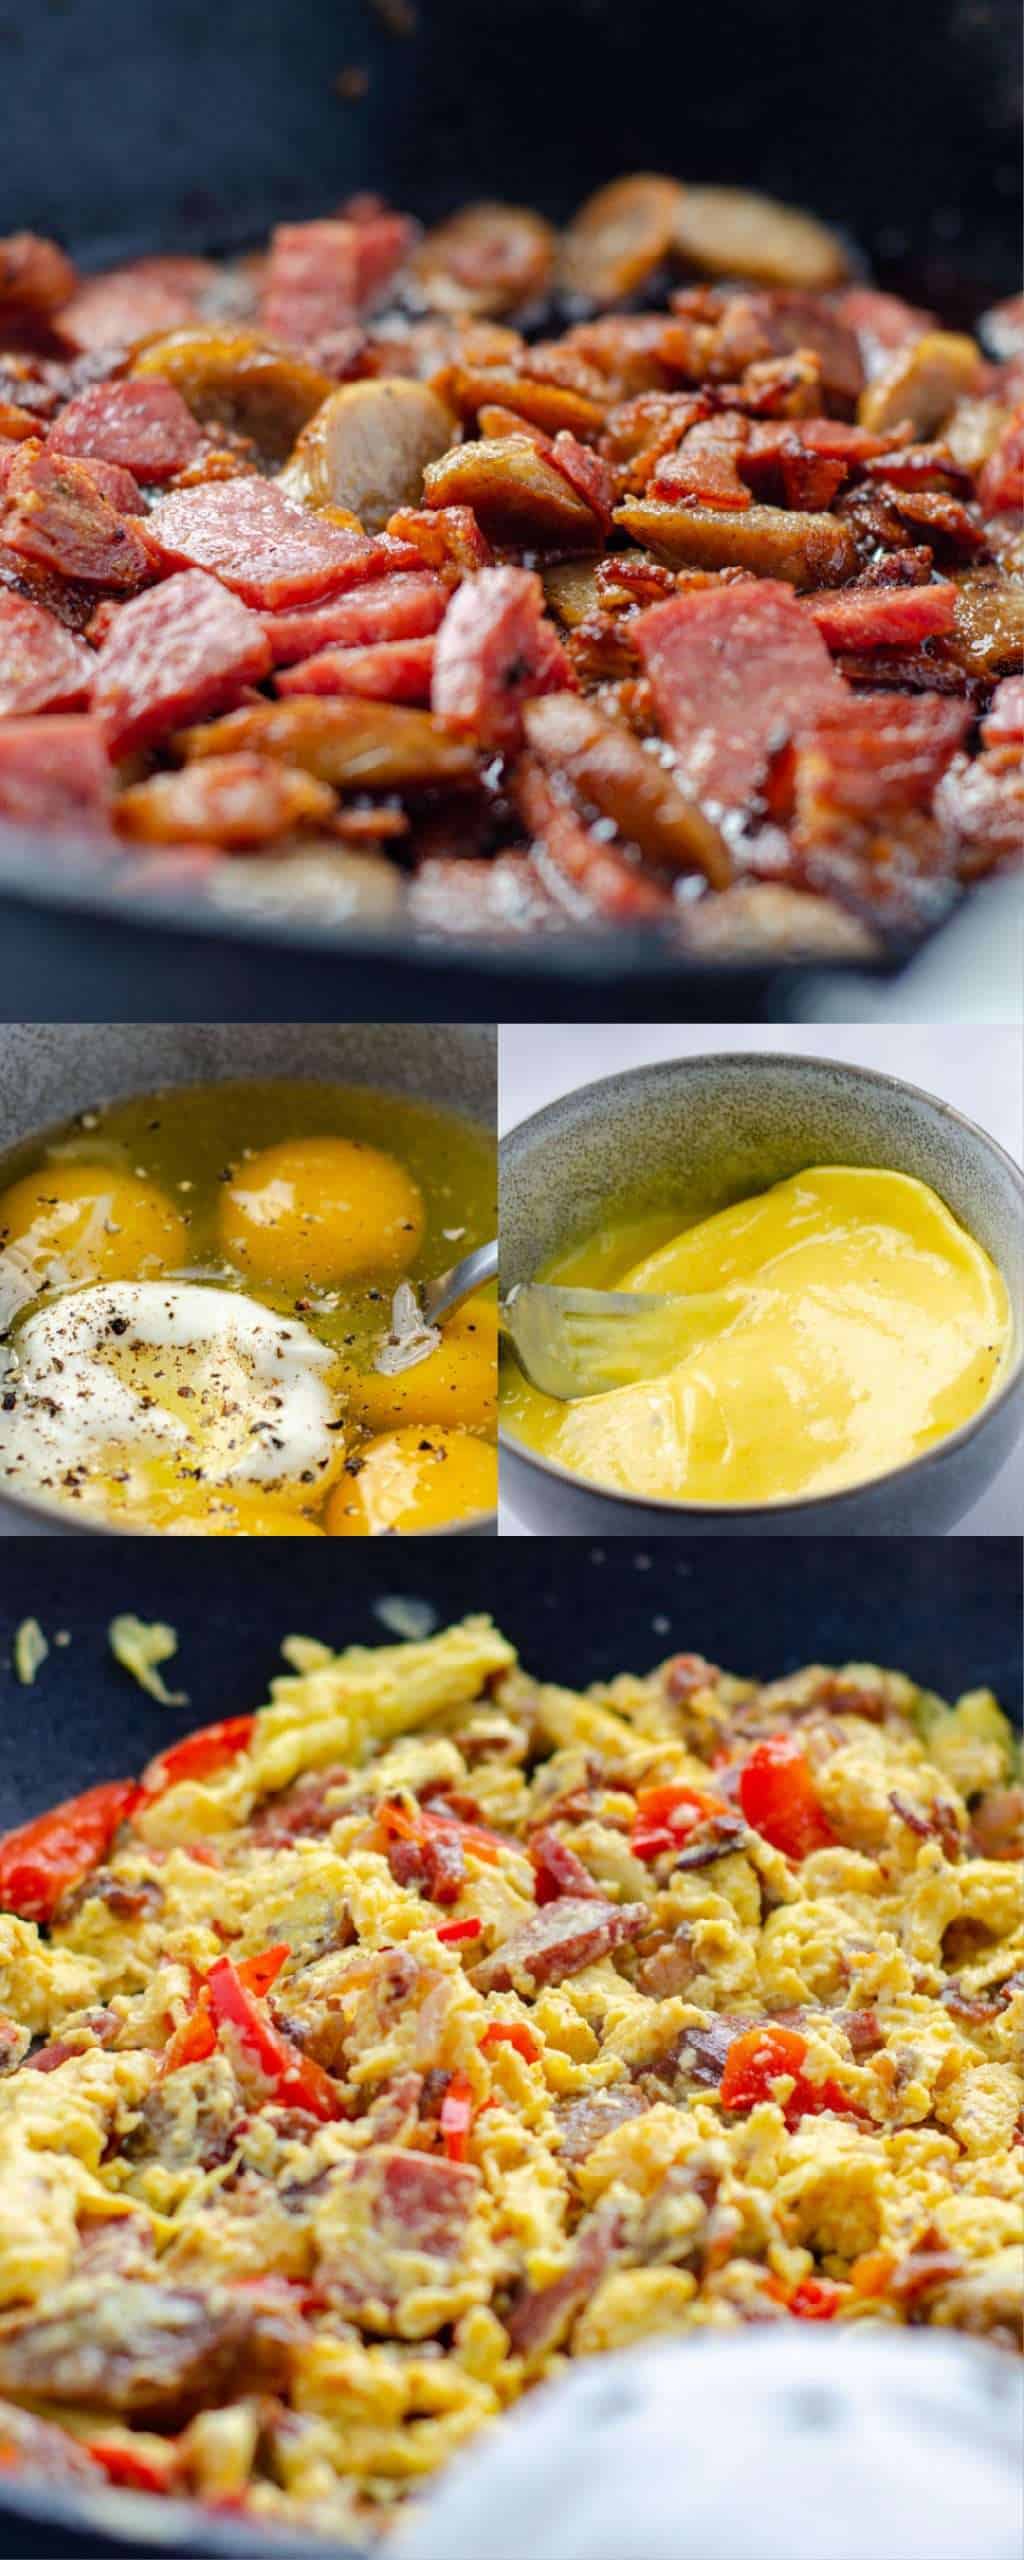 Recipe sequence image for protein scrambled eggs